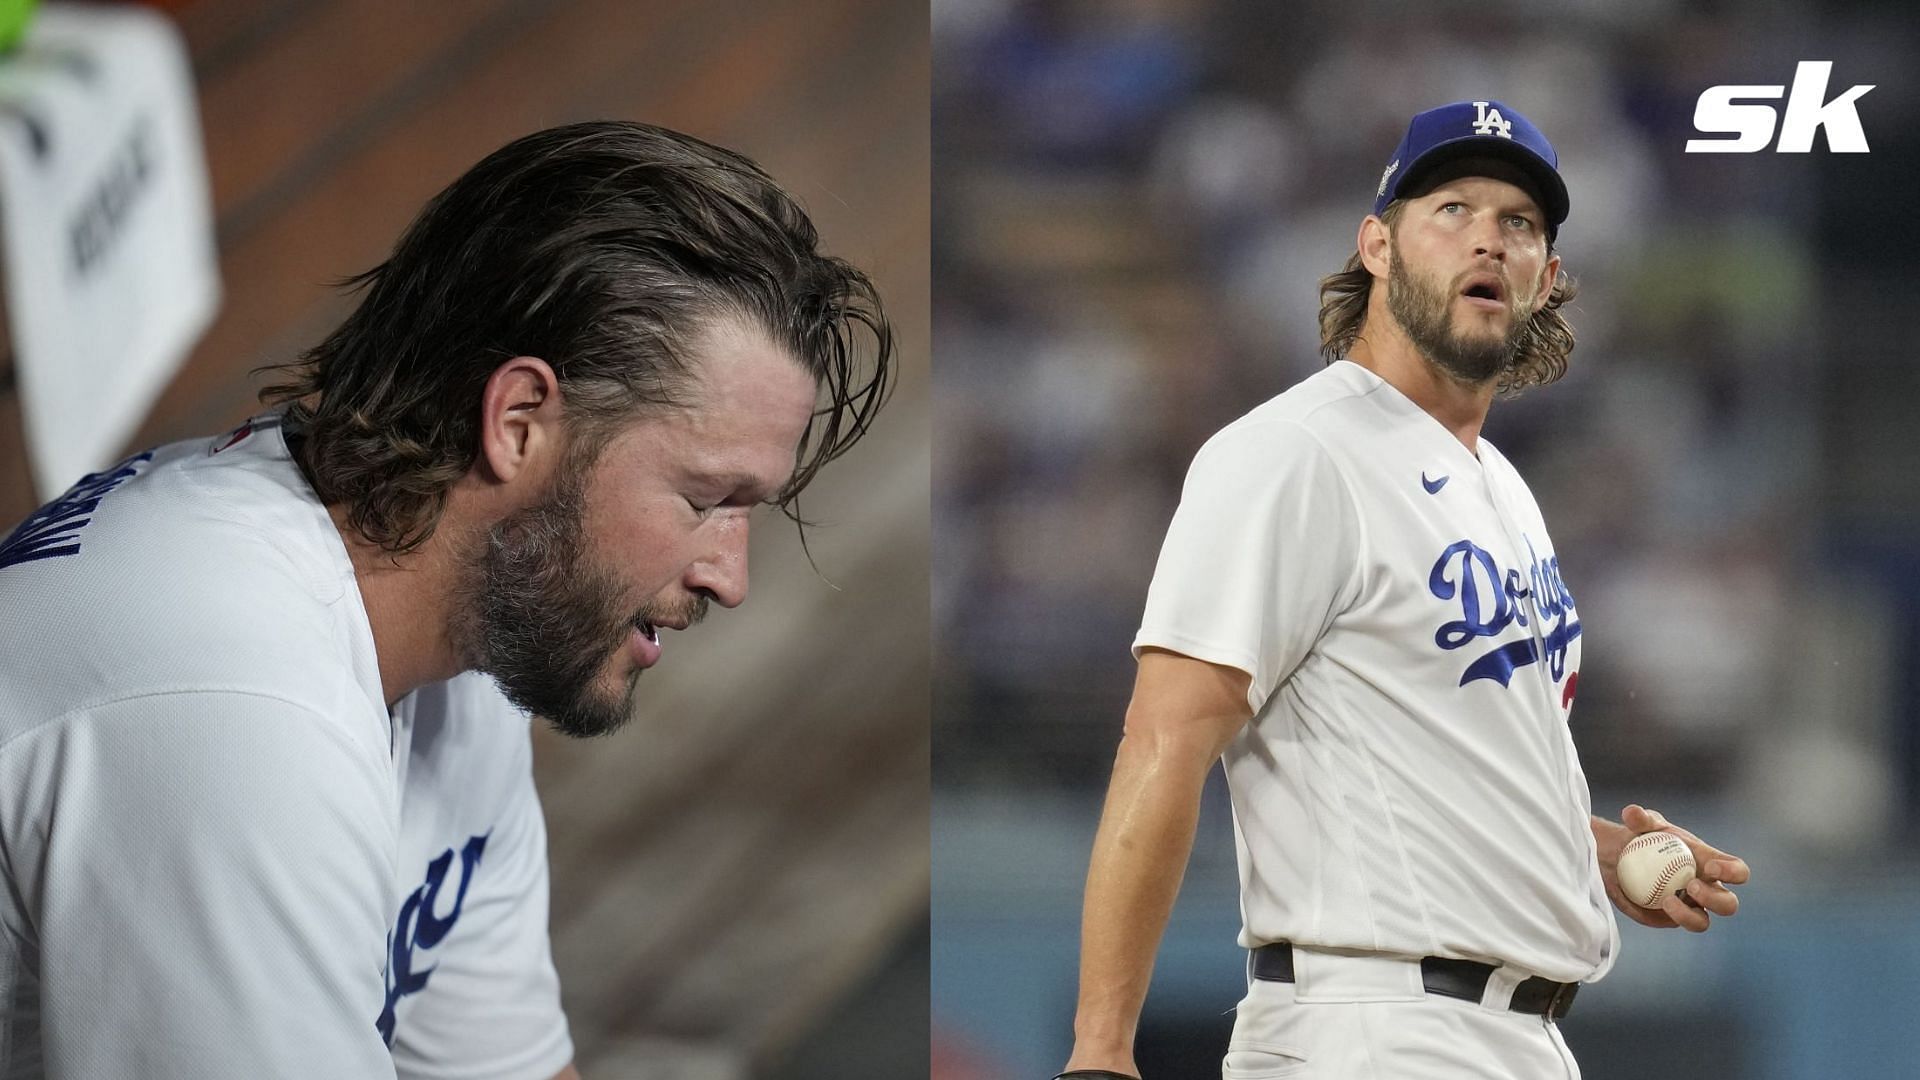 Clayton Kershaw remains unsure of Dodger return, looks forward to pitching again